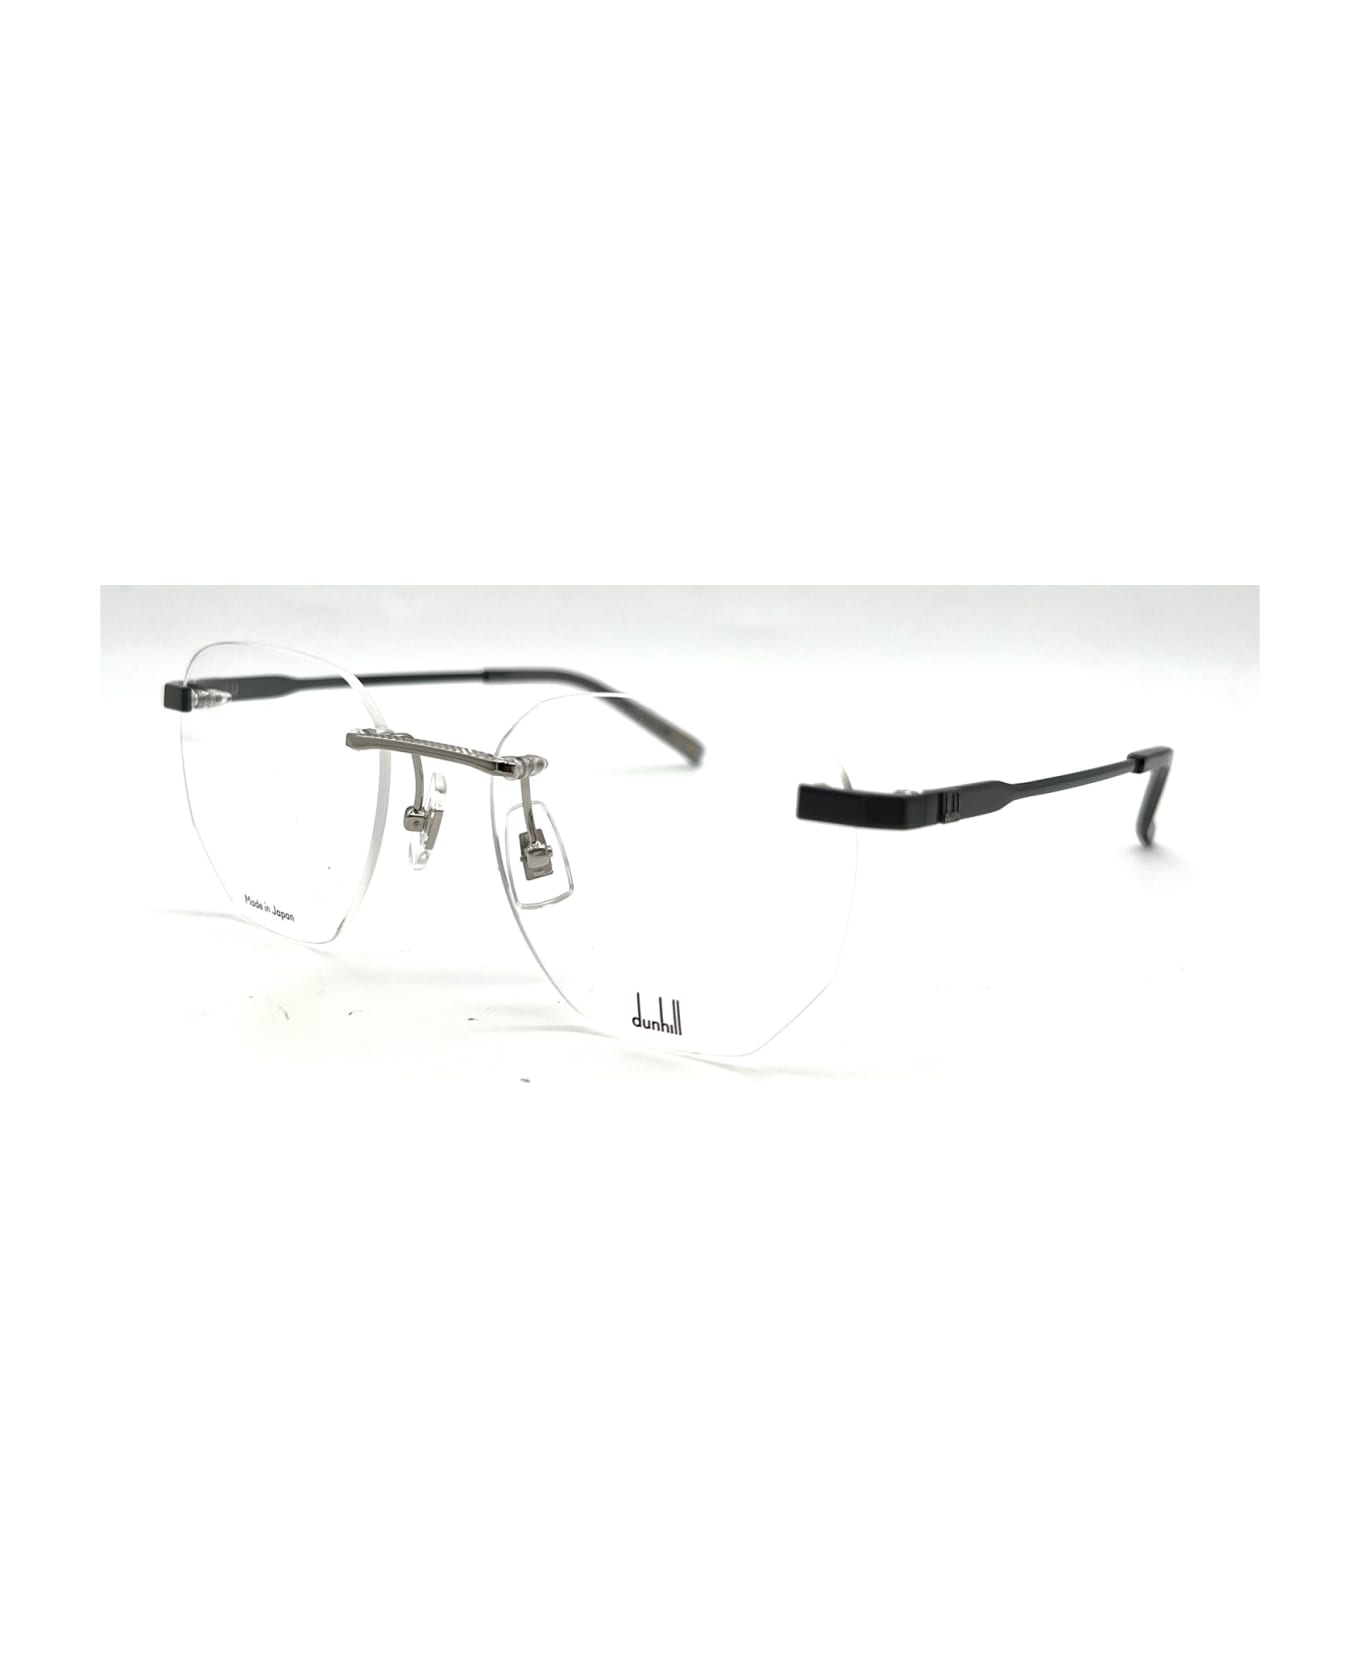 Dunhill DU0066O Eyewear - Import duties included, as applicable